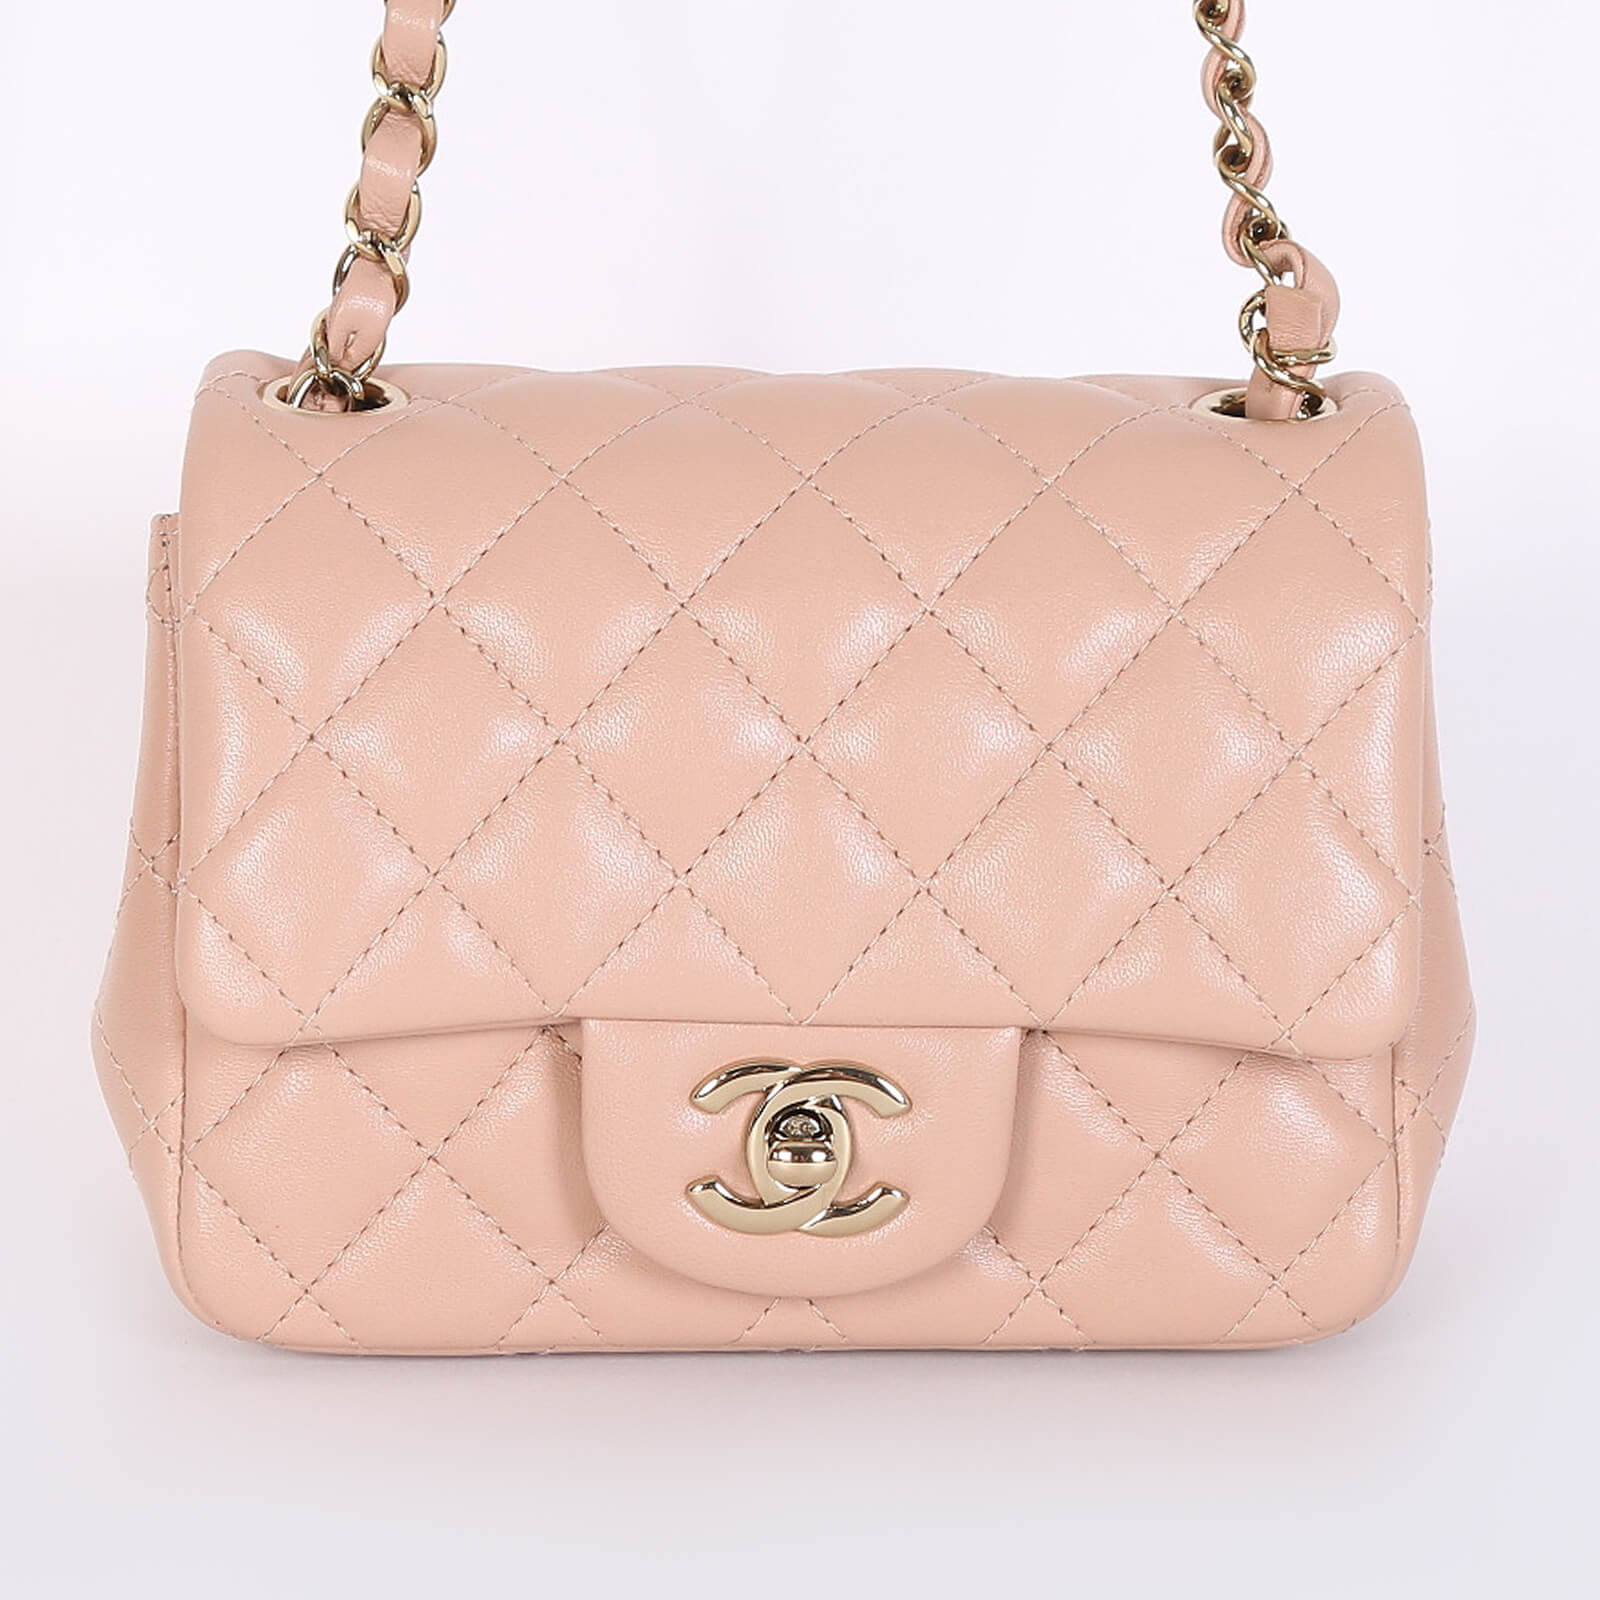 🍞 VINTAGE CHANEL BEIGE MINI CLASSIC QUILTED FULL FLAP BAG CF 19CM